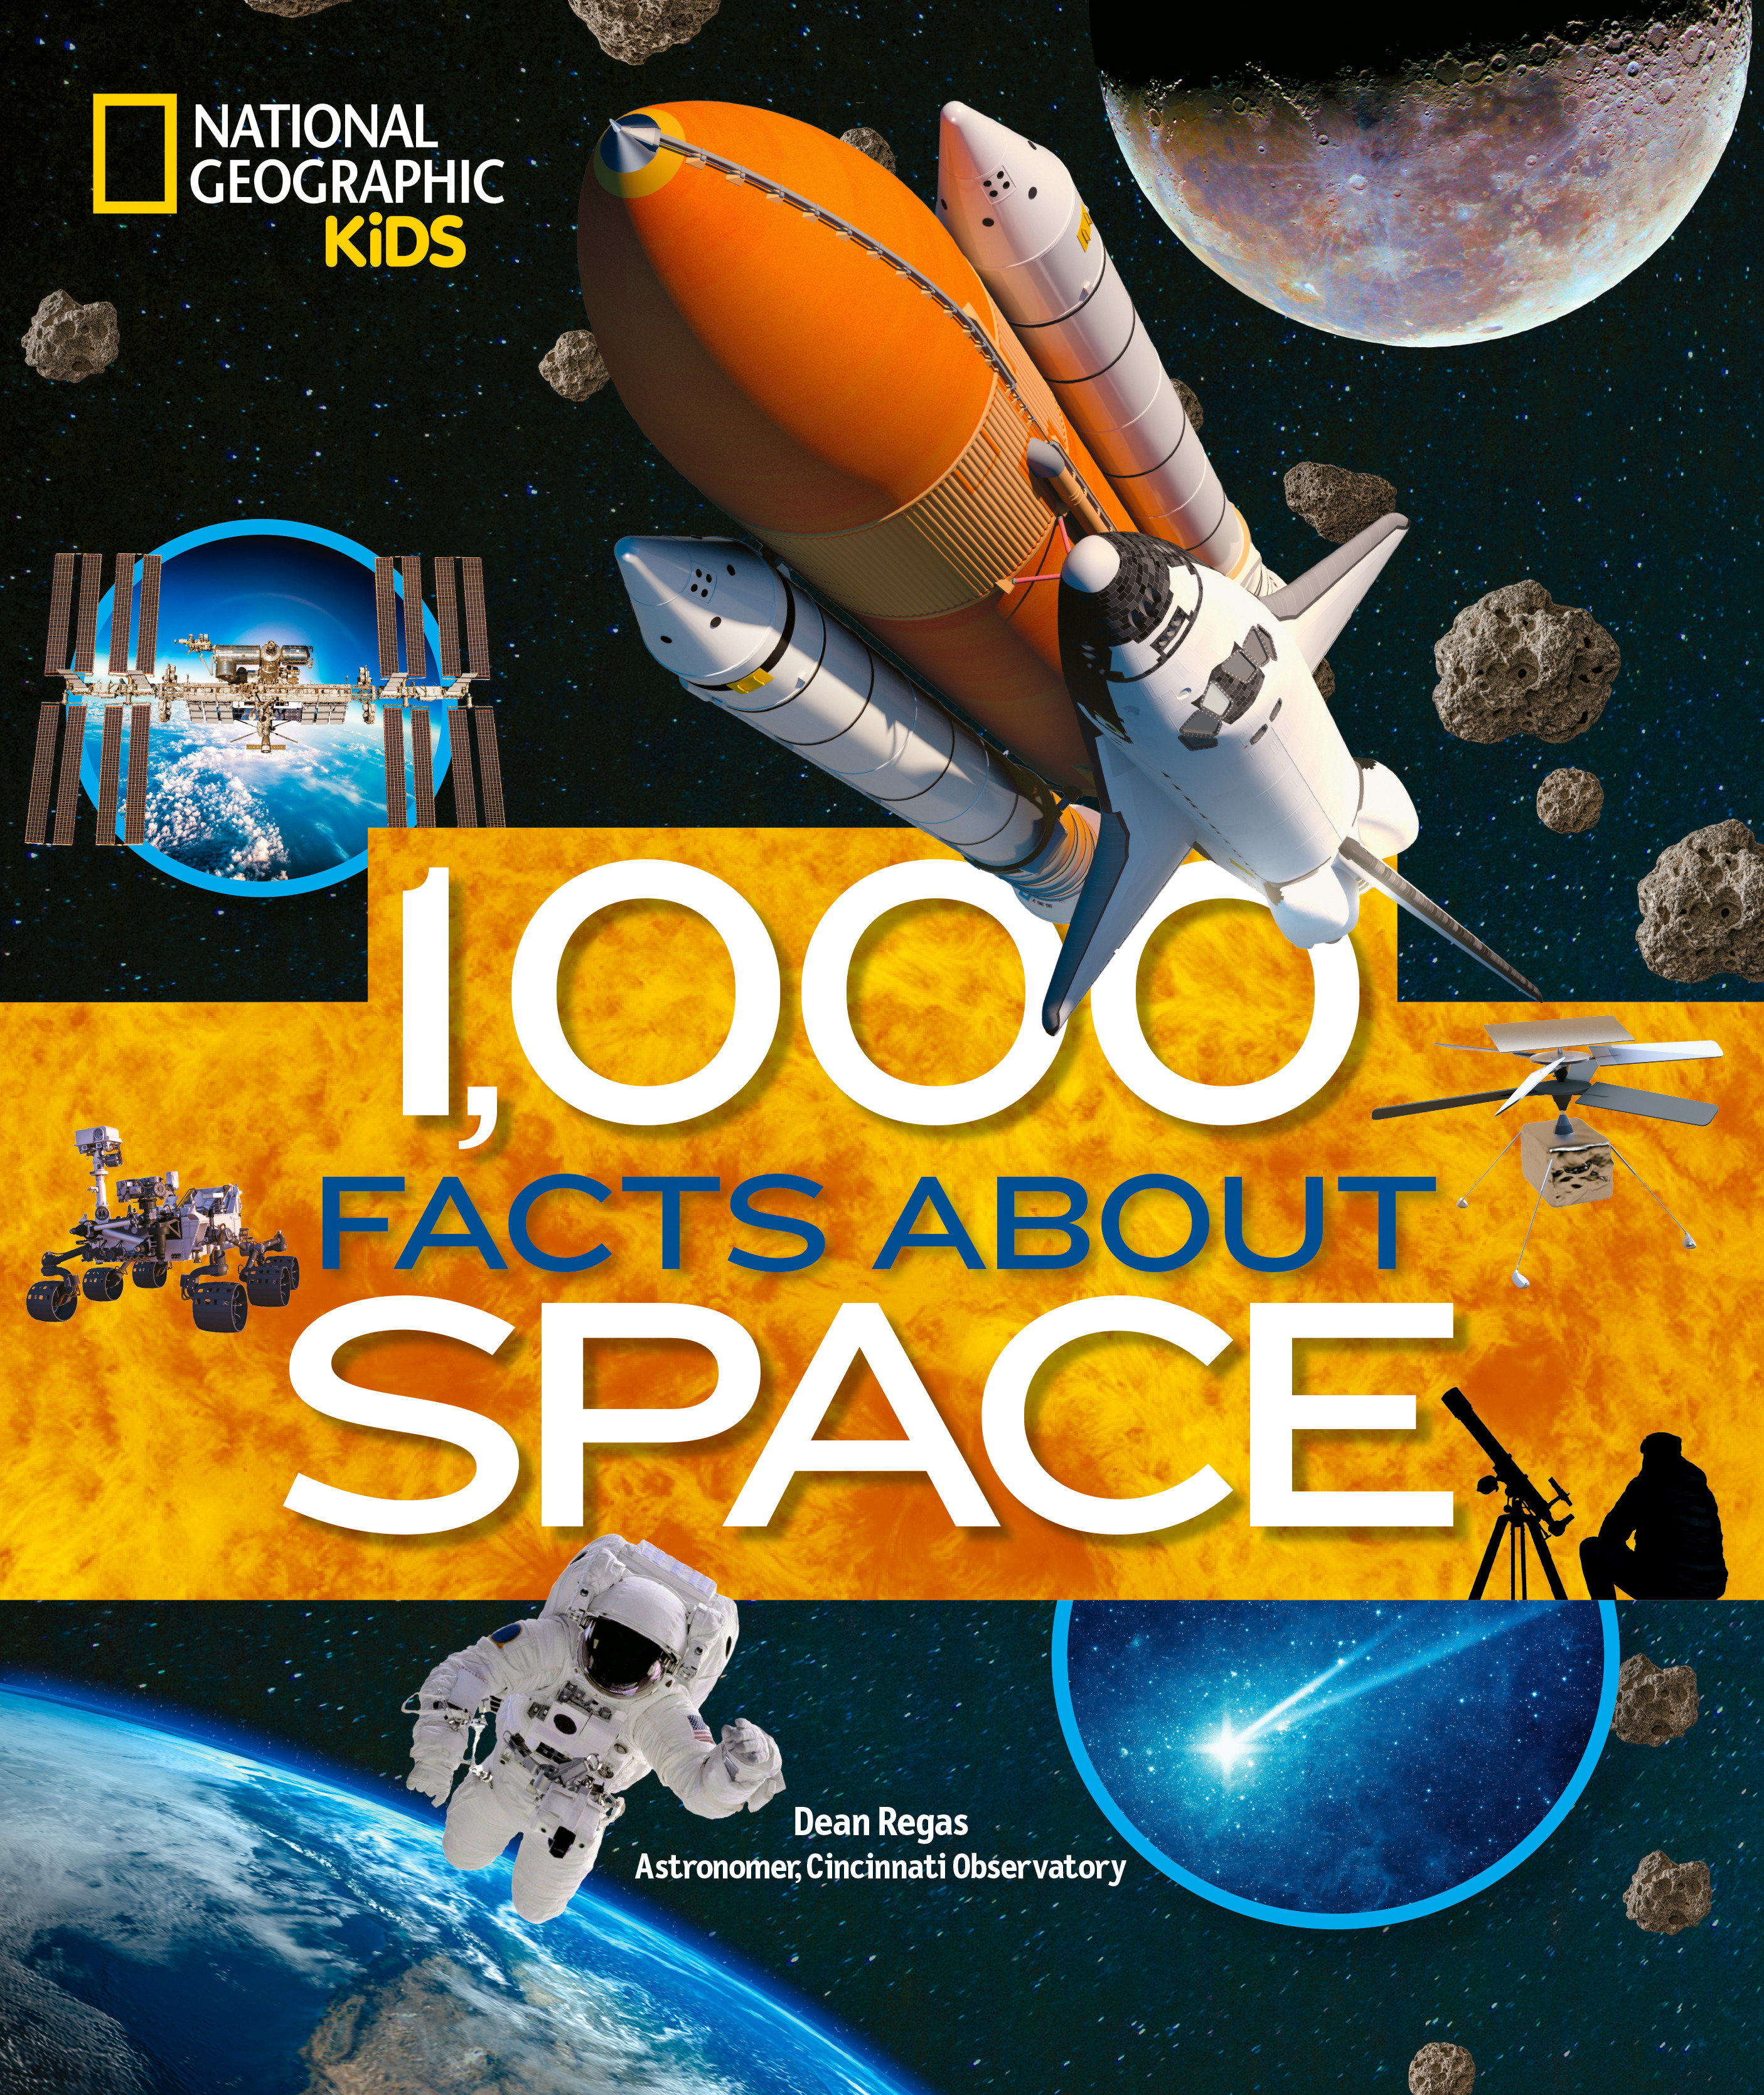 1,000 Facts About Space (Hardcover Book)